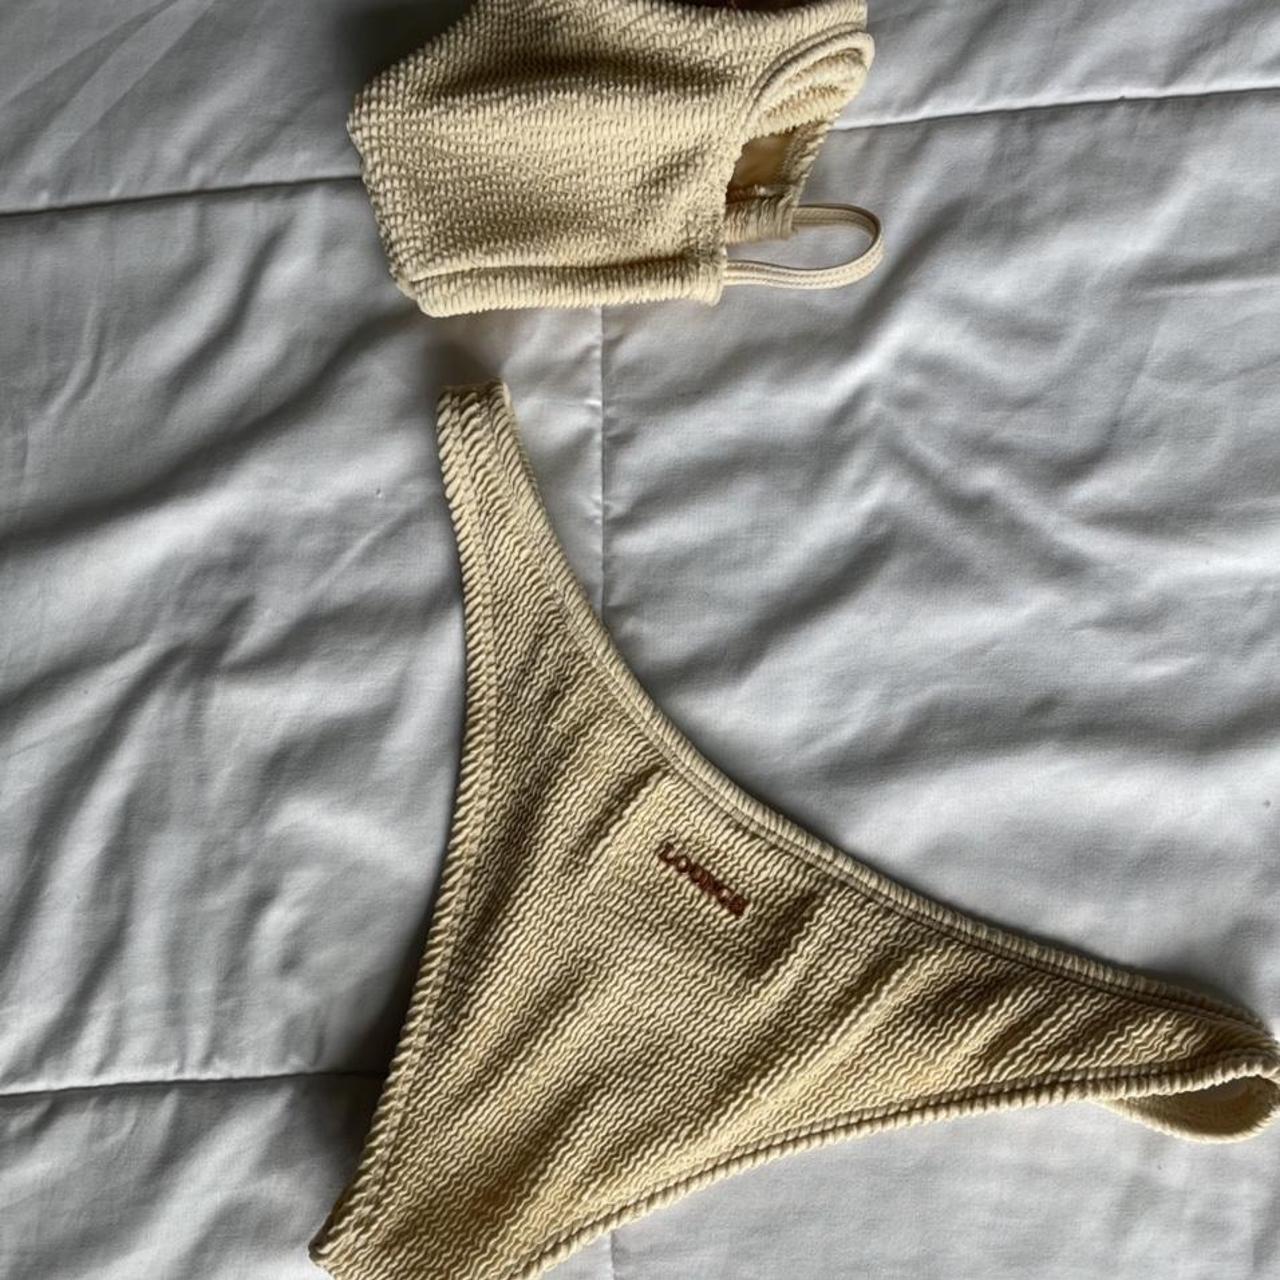 Product Image 1 - Ribbed LOUNGE bathing suit 🤎
-only